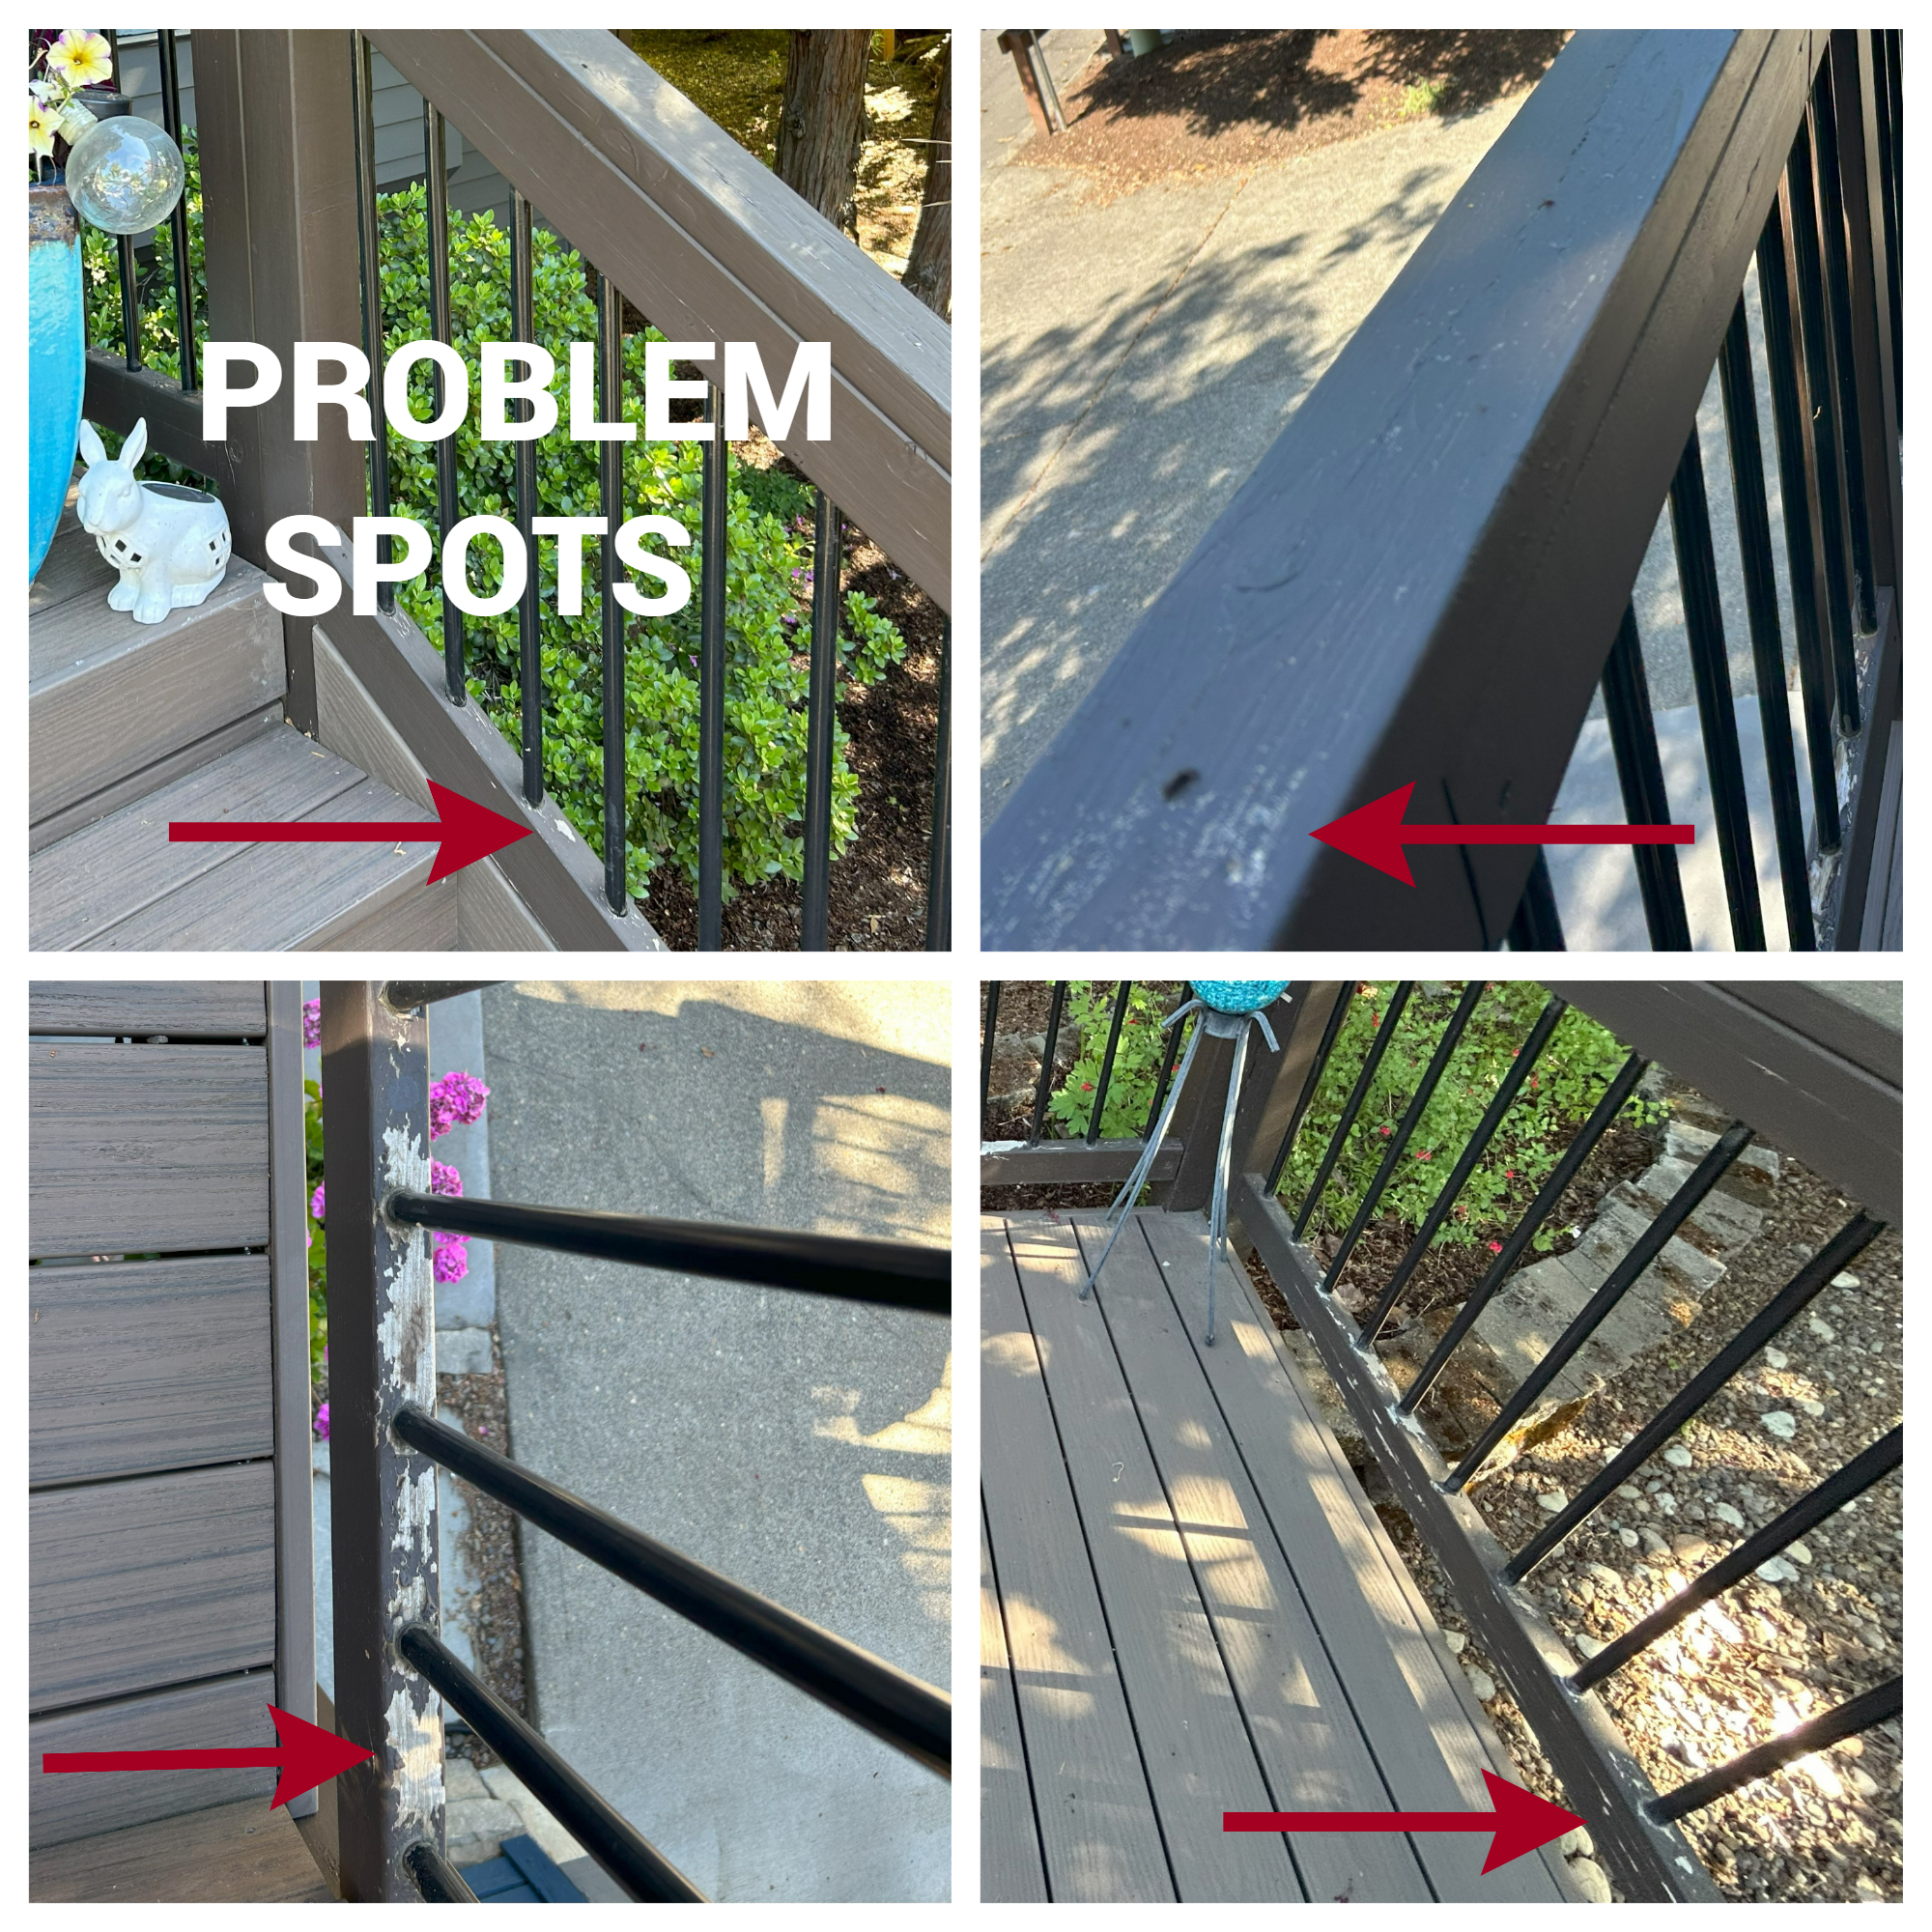 A series of photos demonstrating safety measures and deck railing maintenance to fix a problem spot on a well-maintained deck.